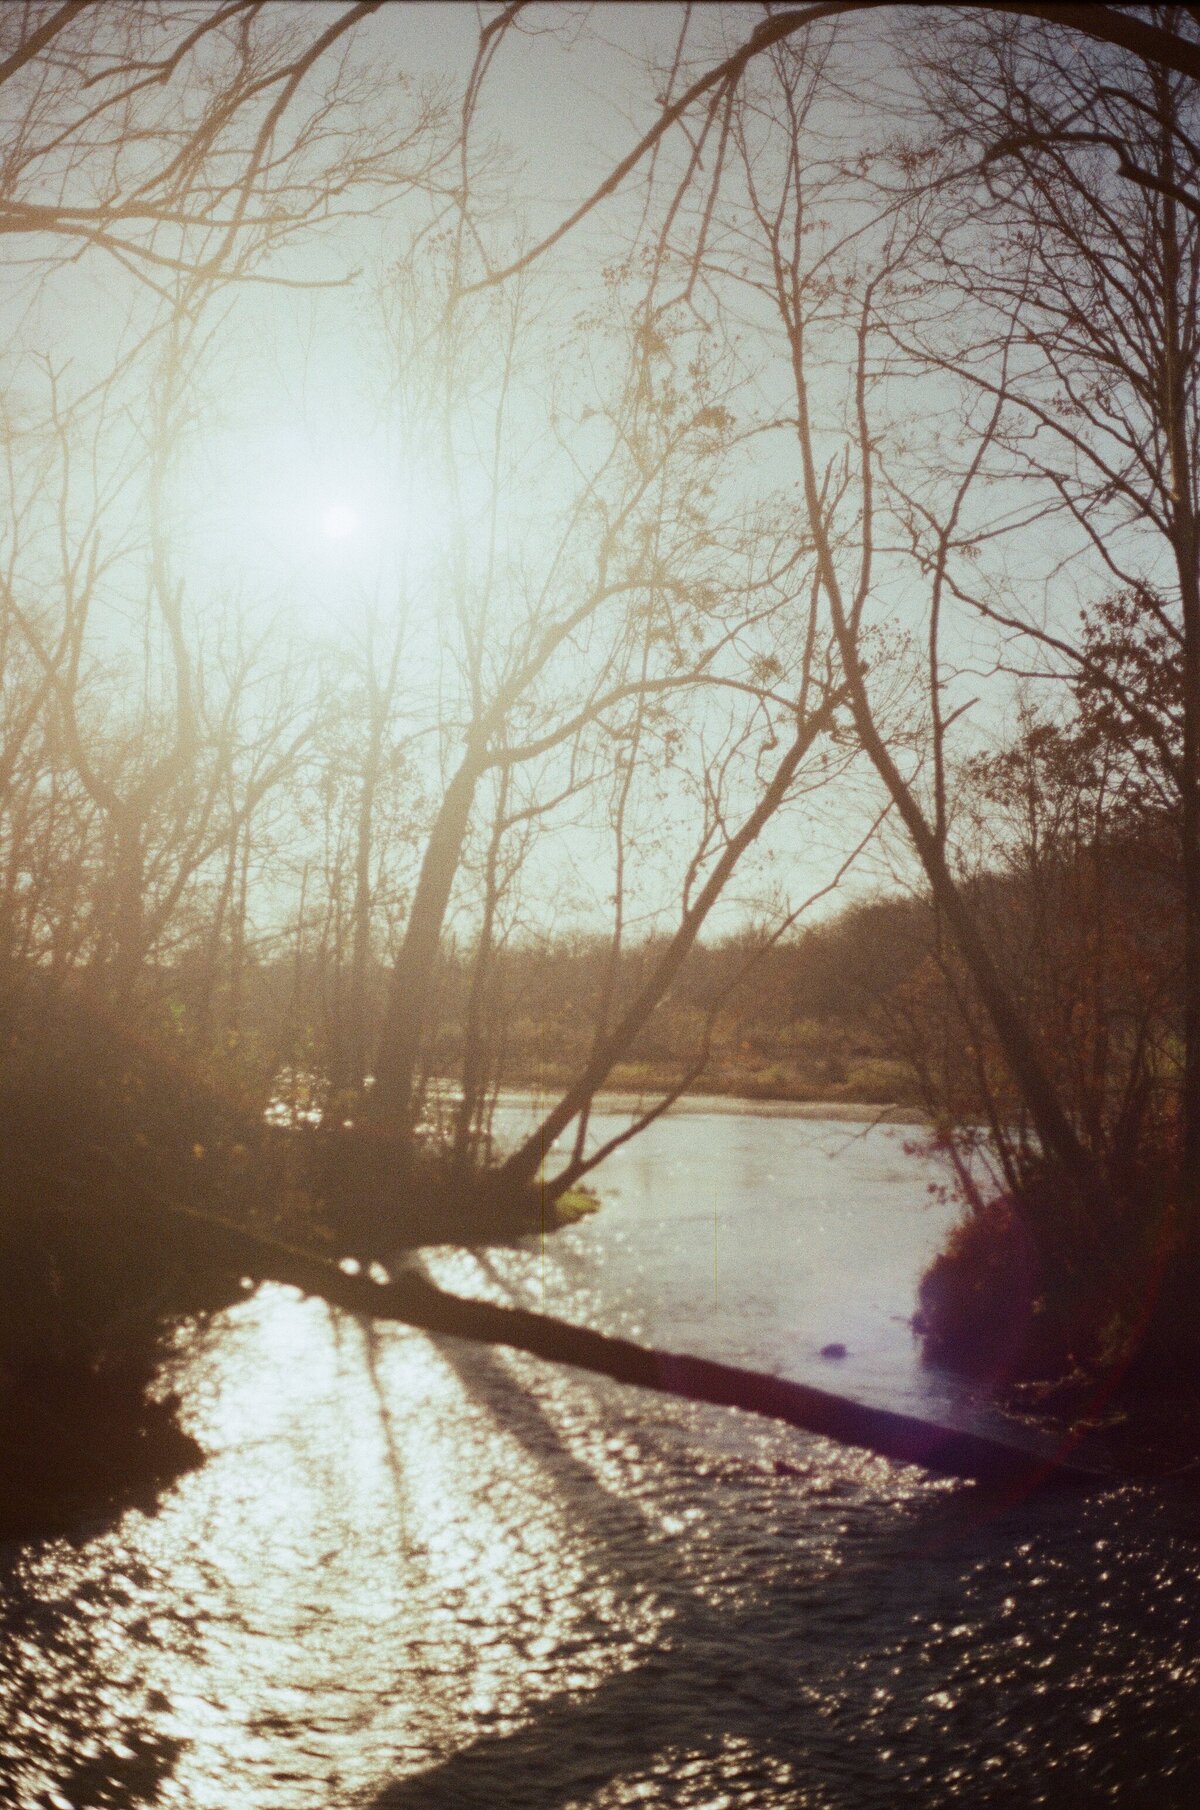 river and bare trees on film